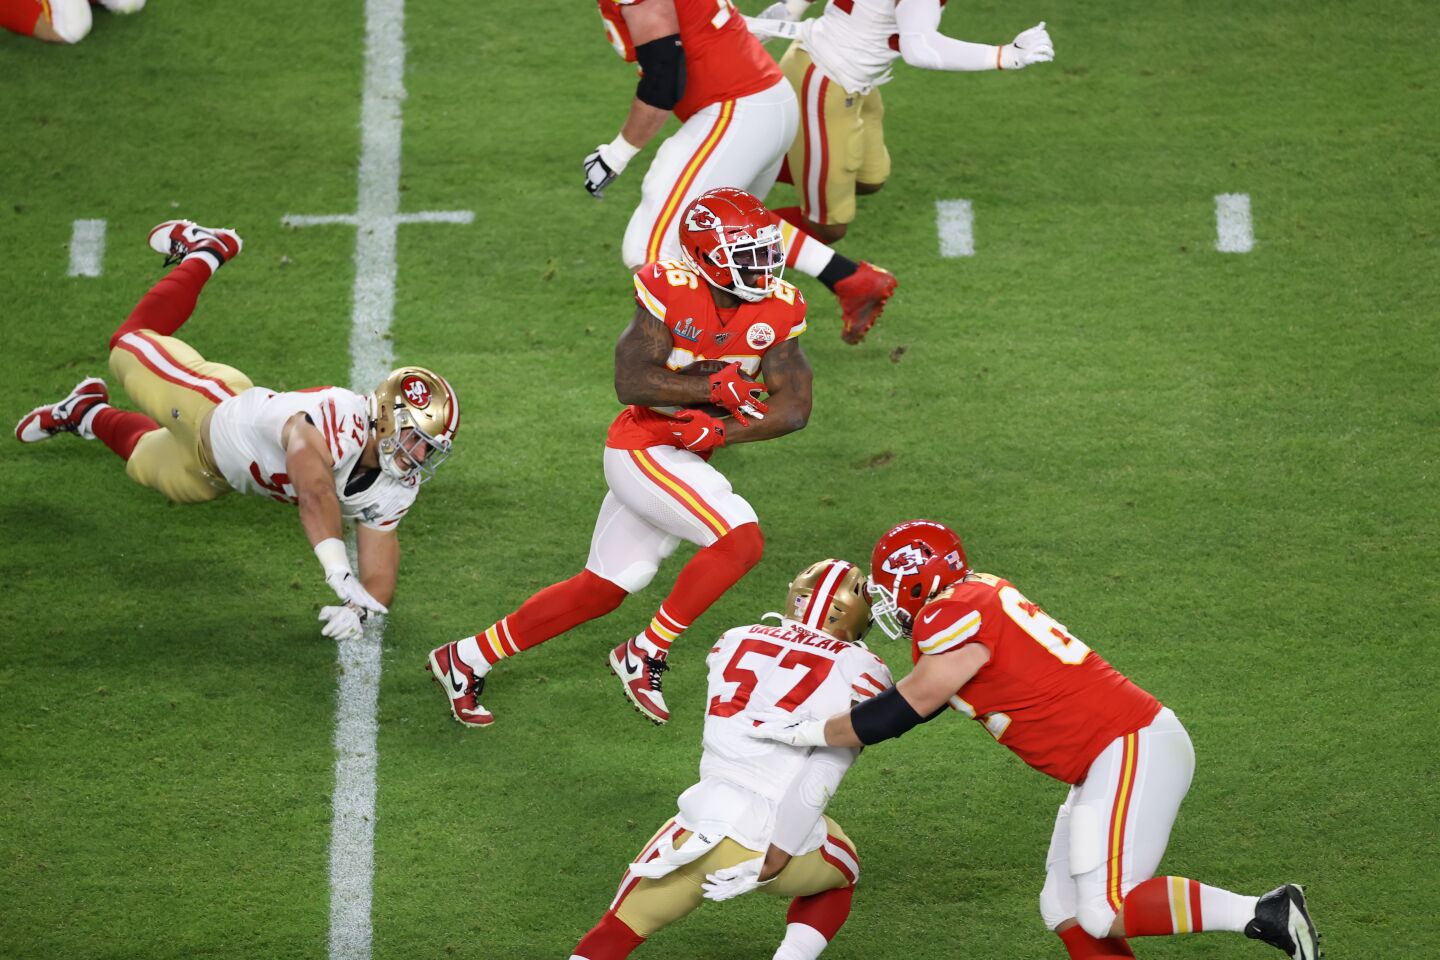 Kansas City Chiefs running back Damien Williams carries the ball against the San Francisco 49ers during the first quarter.